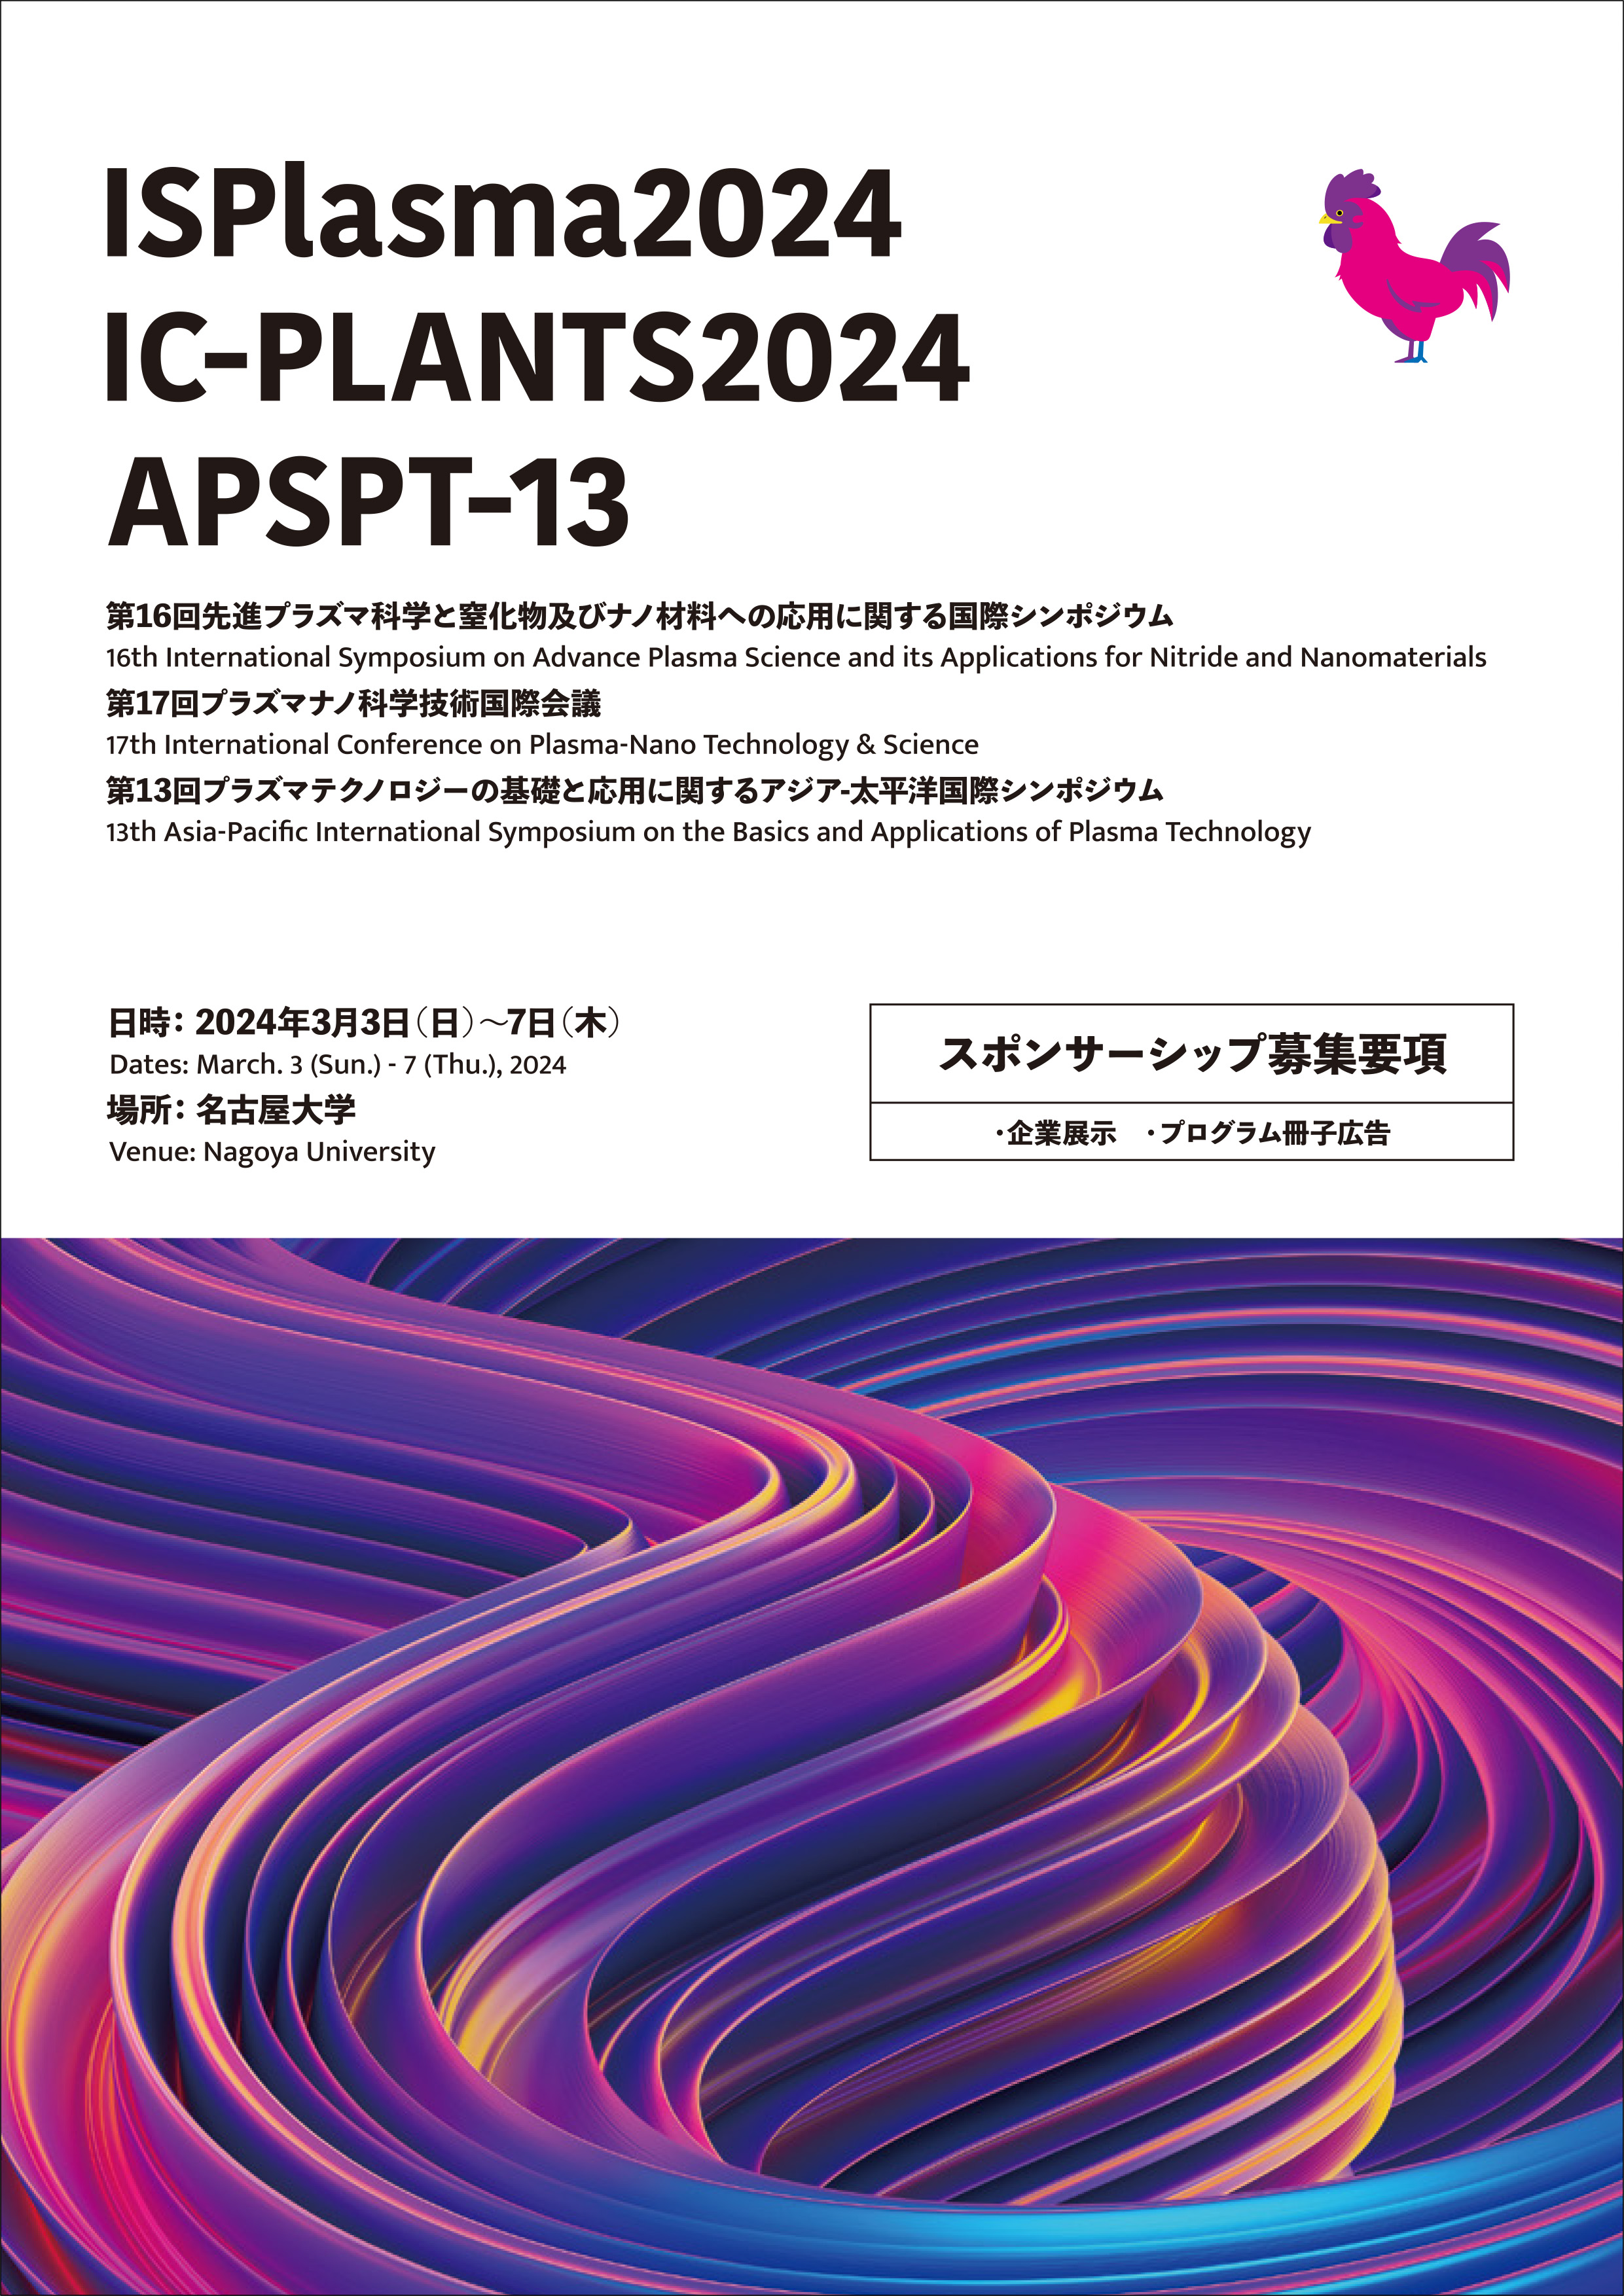 2020 International Conference on Solid State Devices and Materials / 2024年 国際固体素子・材料カンファレンス(SSDM2024）